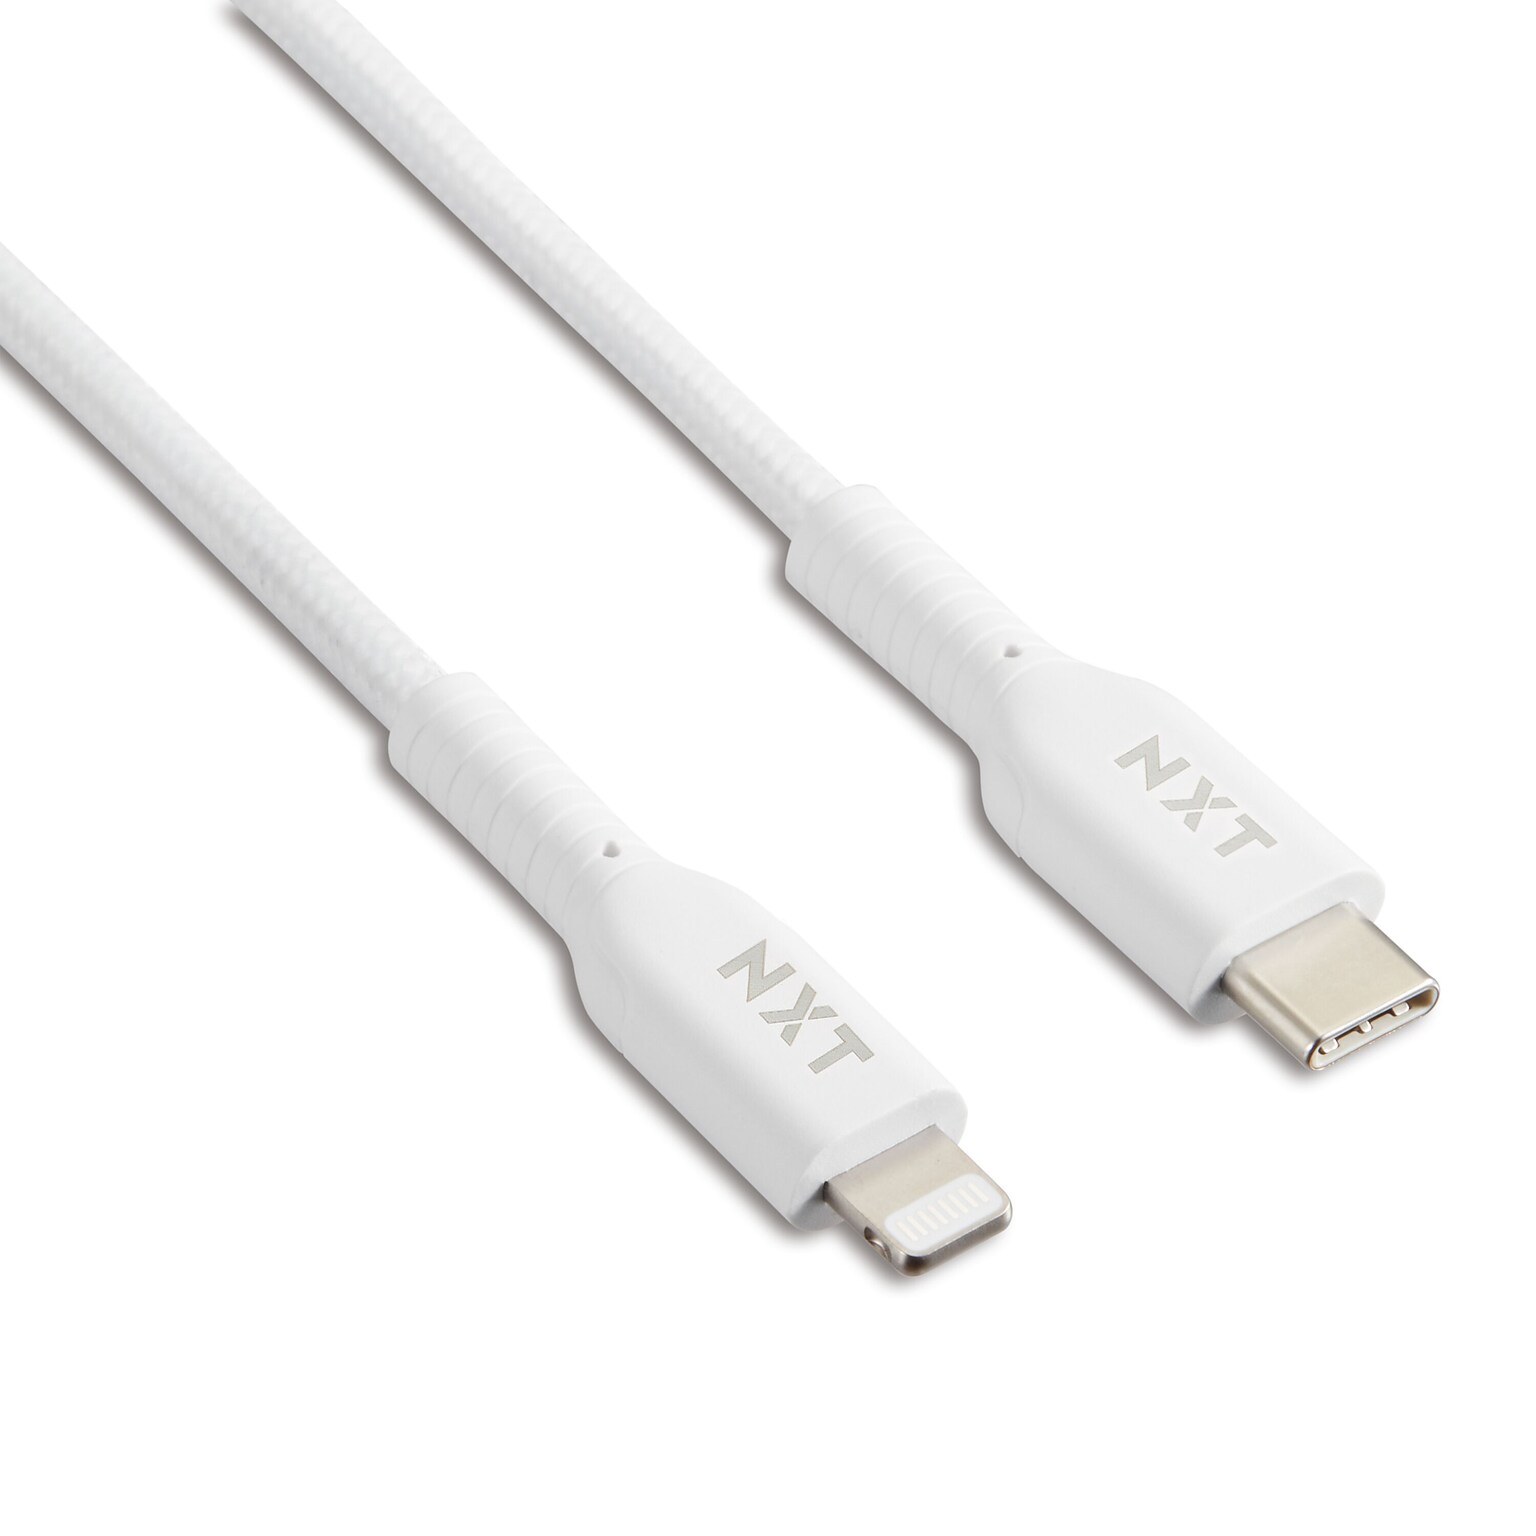 NXT Technologies™ 4 Ft. Braided USB-C to Lightning Cable for iPhone/iPad/iPod touch, White (NX60445)